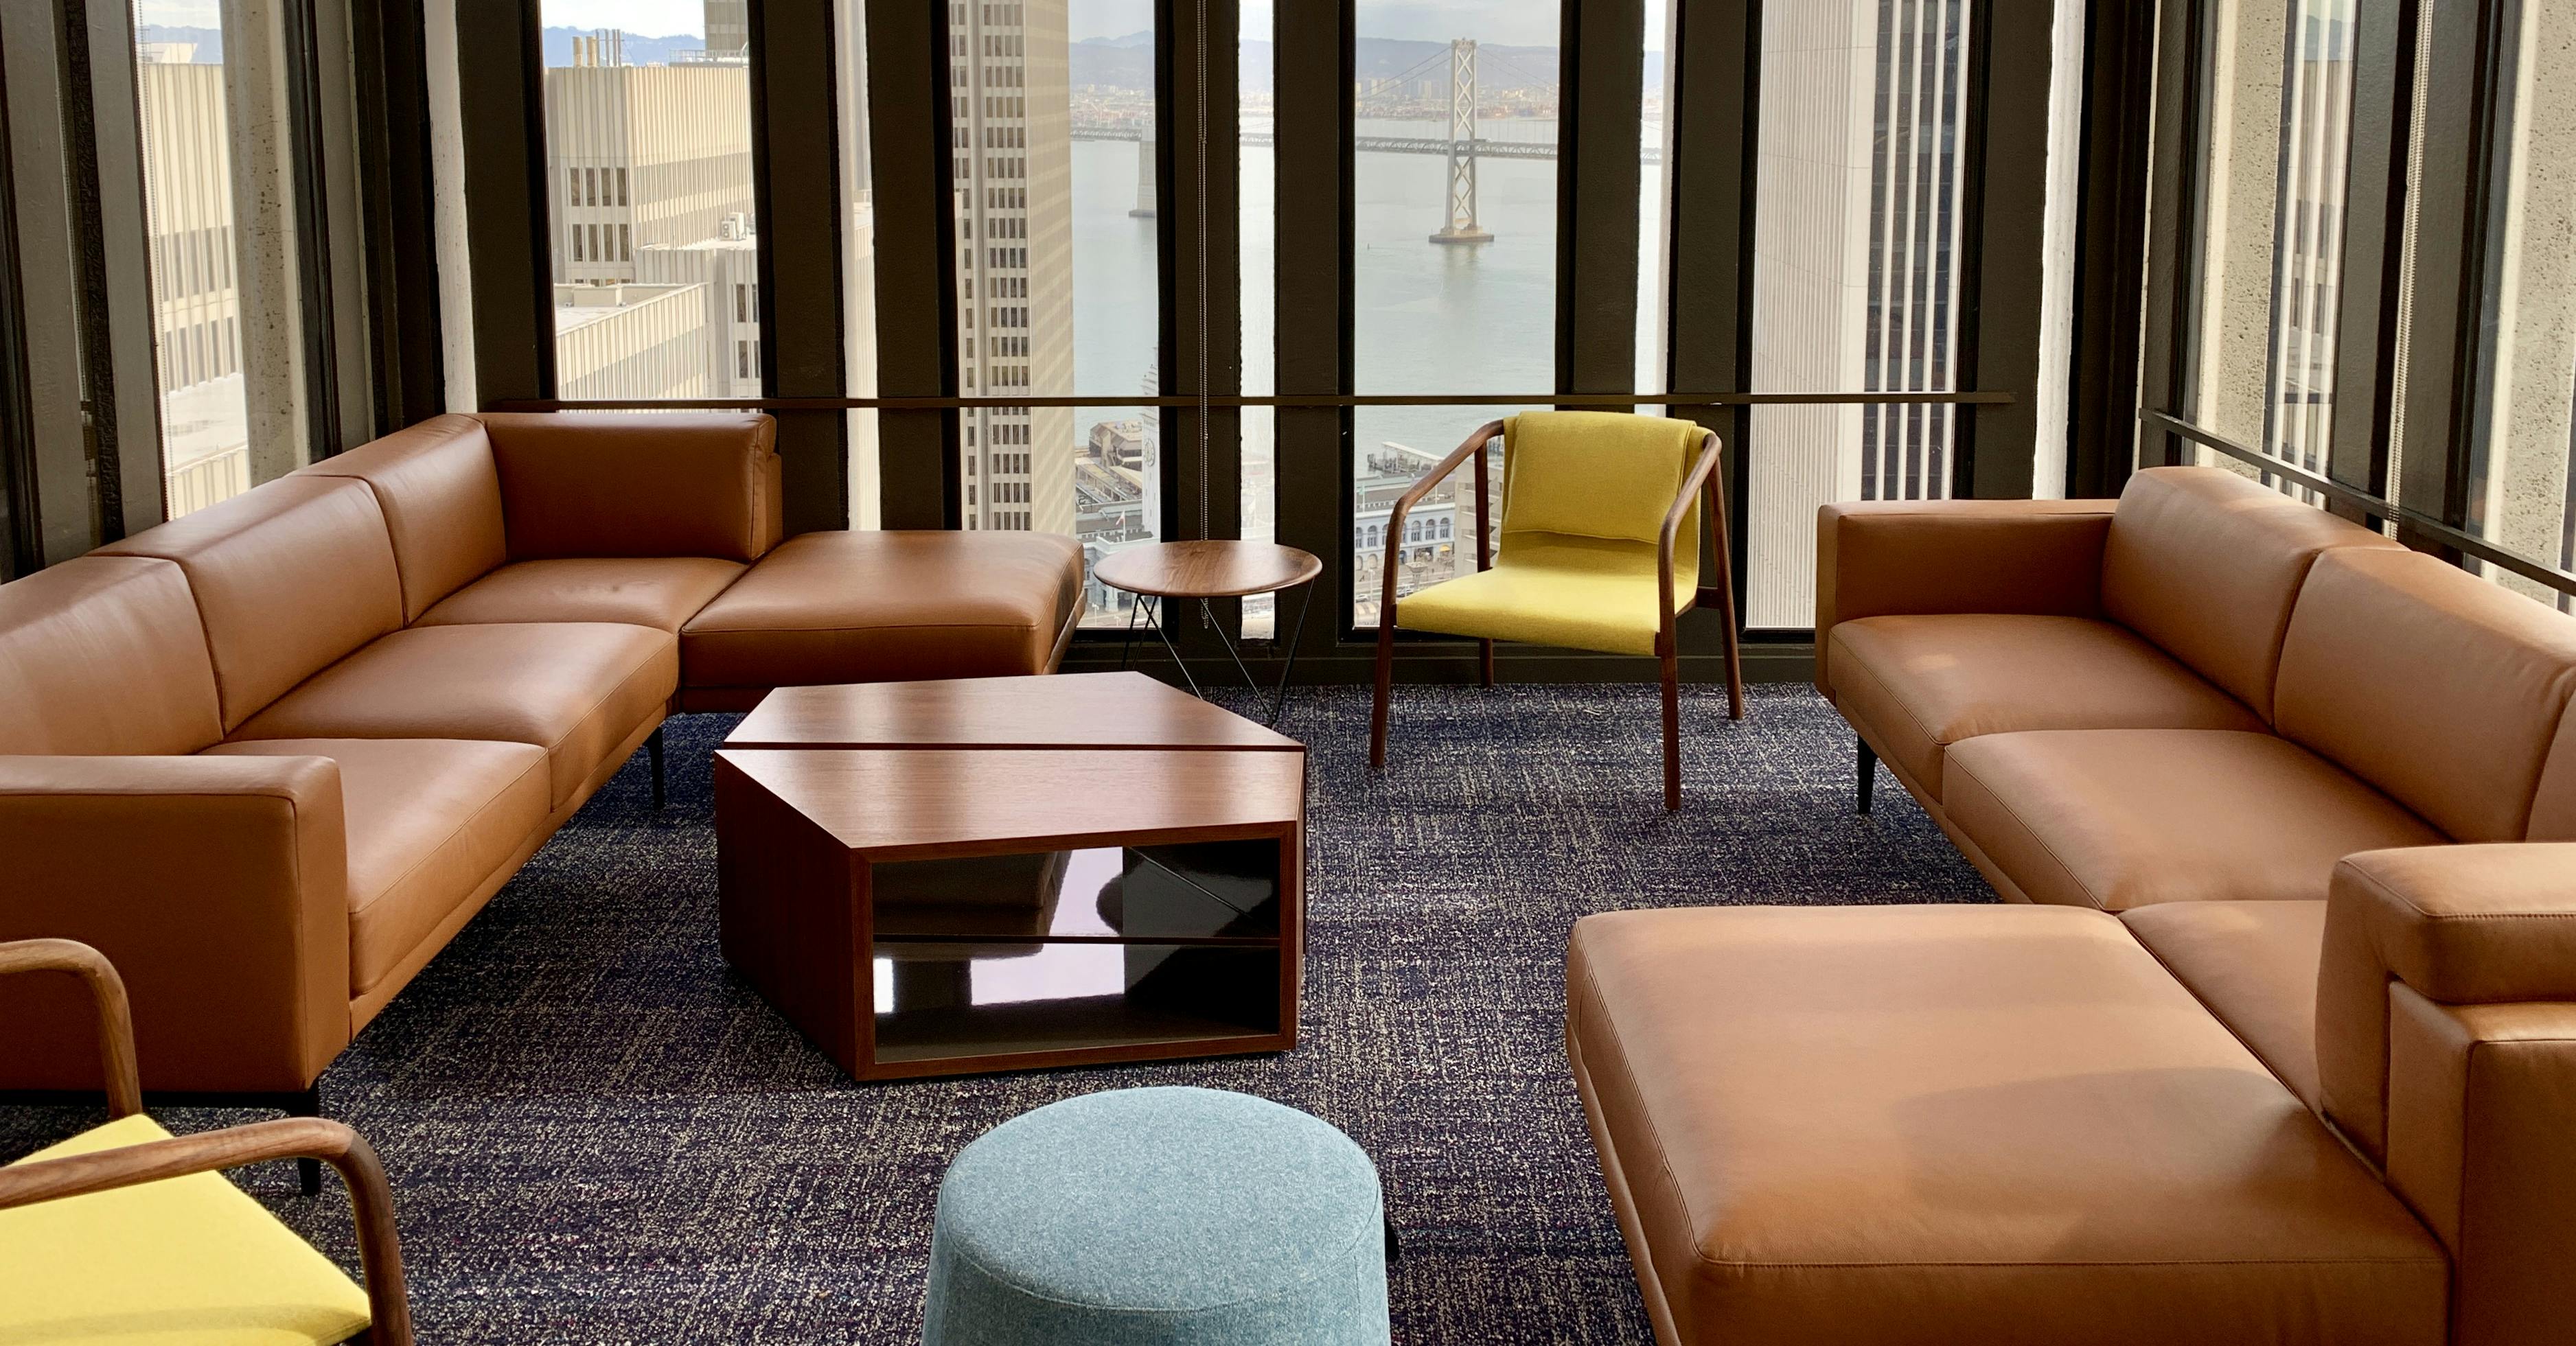 Lounge area from Nixon Peabody's San Francisco office, showing caramel-colored couches, a couple of yellow chairs, and a coffee table